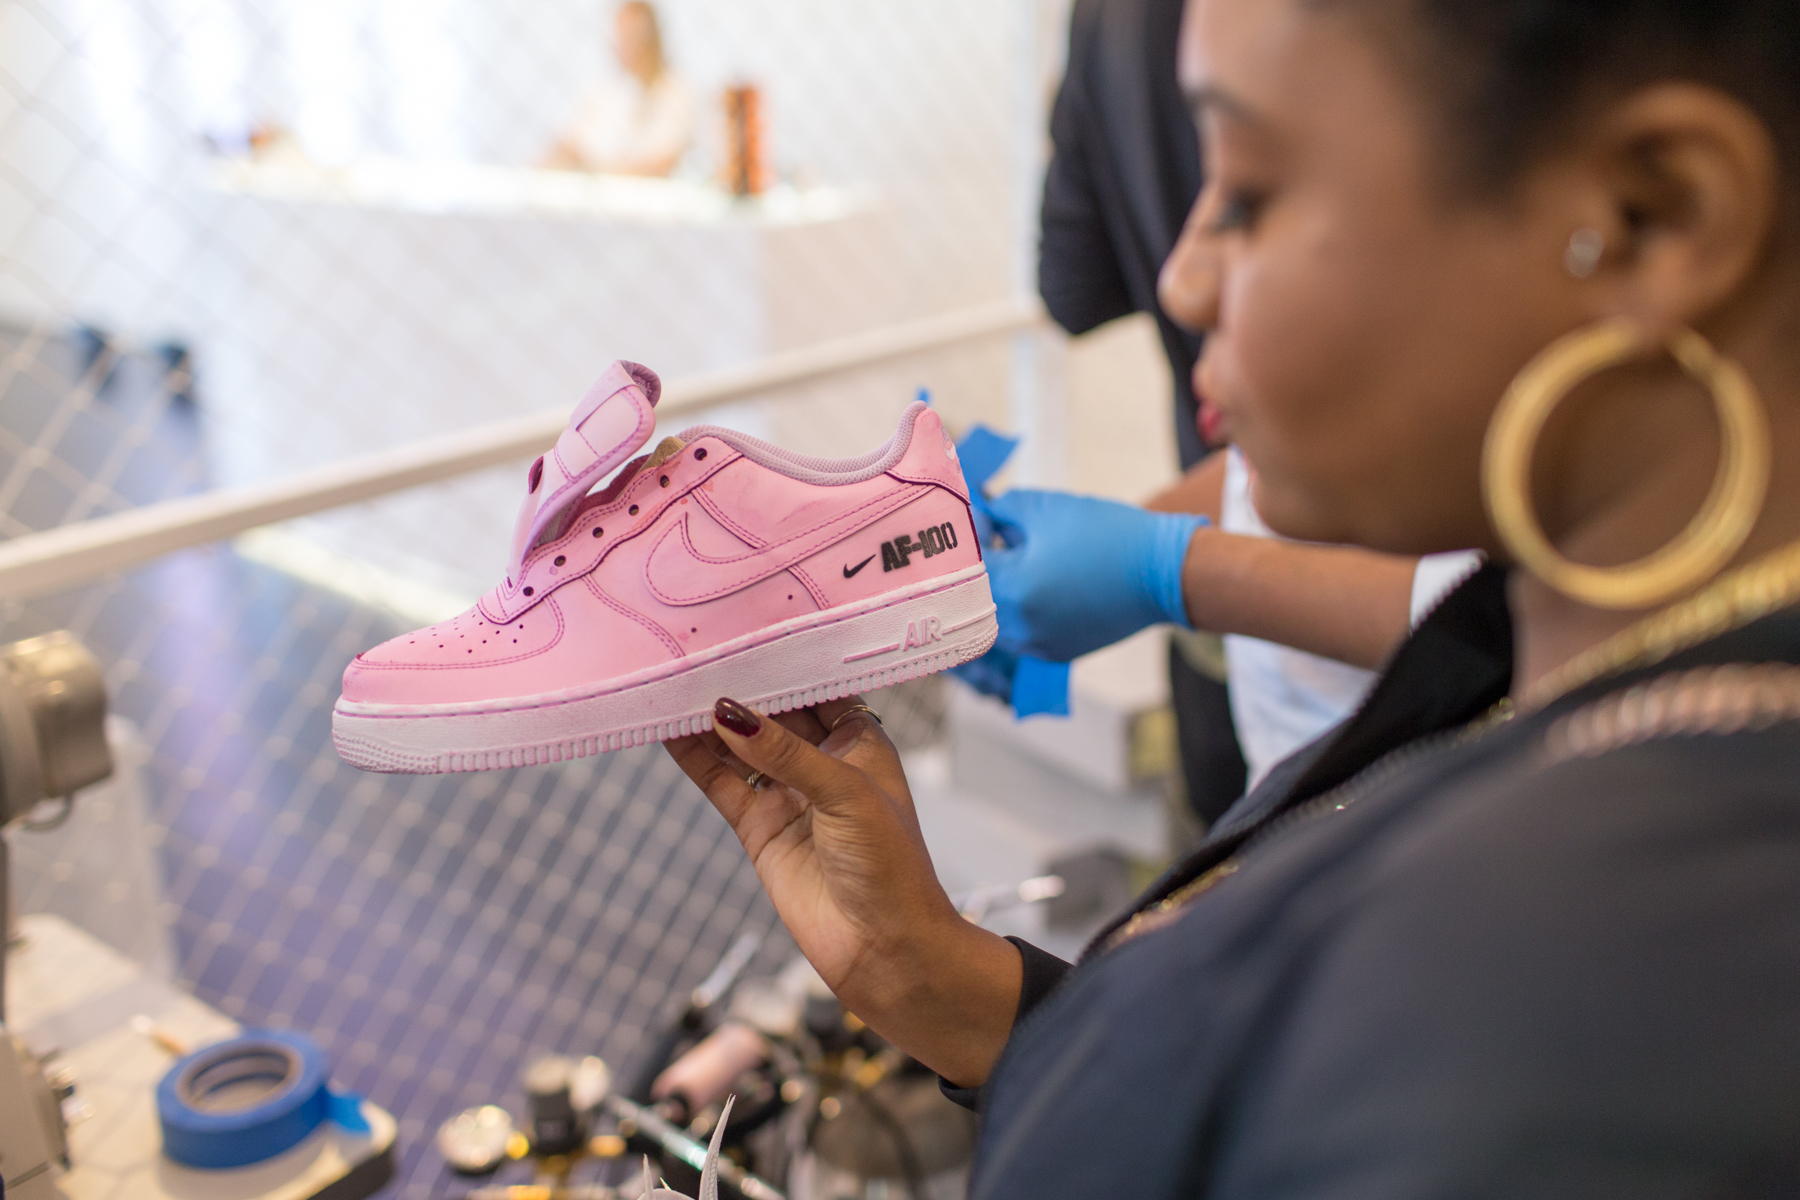 Serena Williams Shares Custom Nike AF1s Inspired by Her Iconic Looks